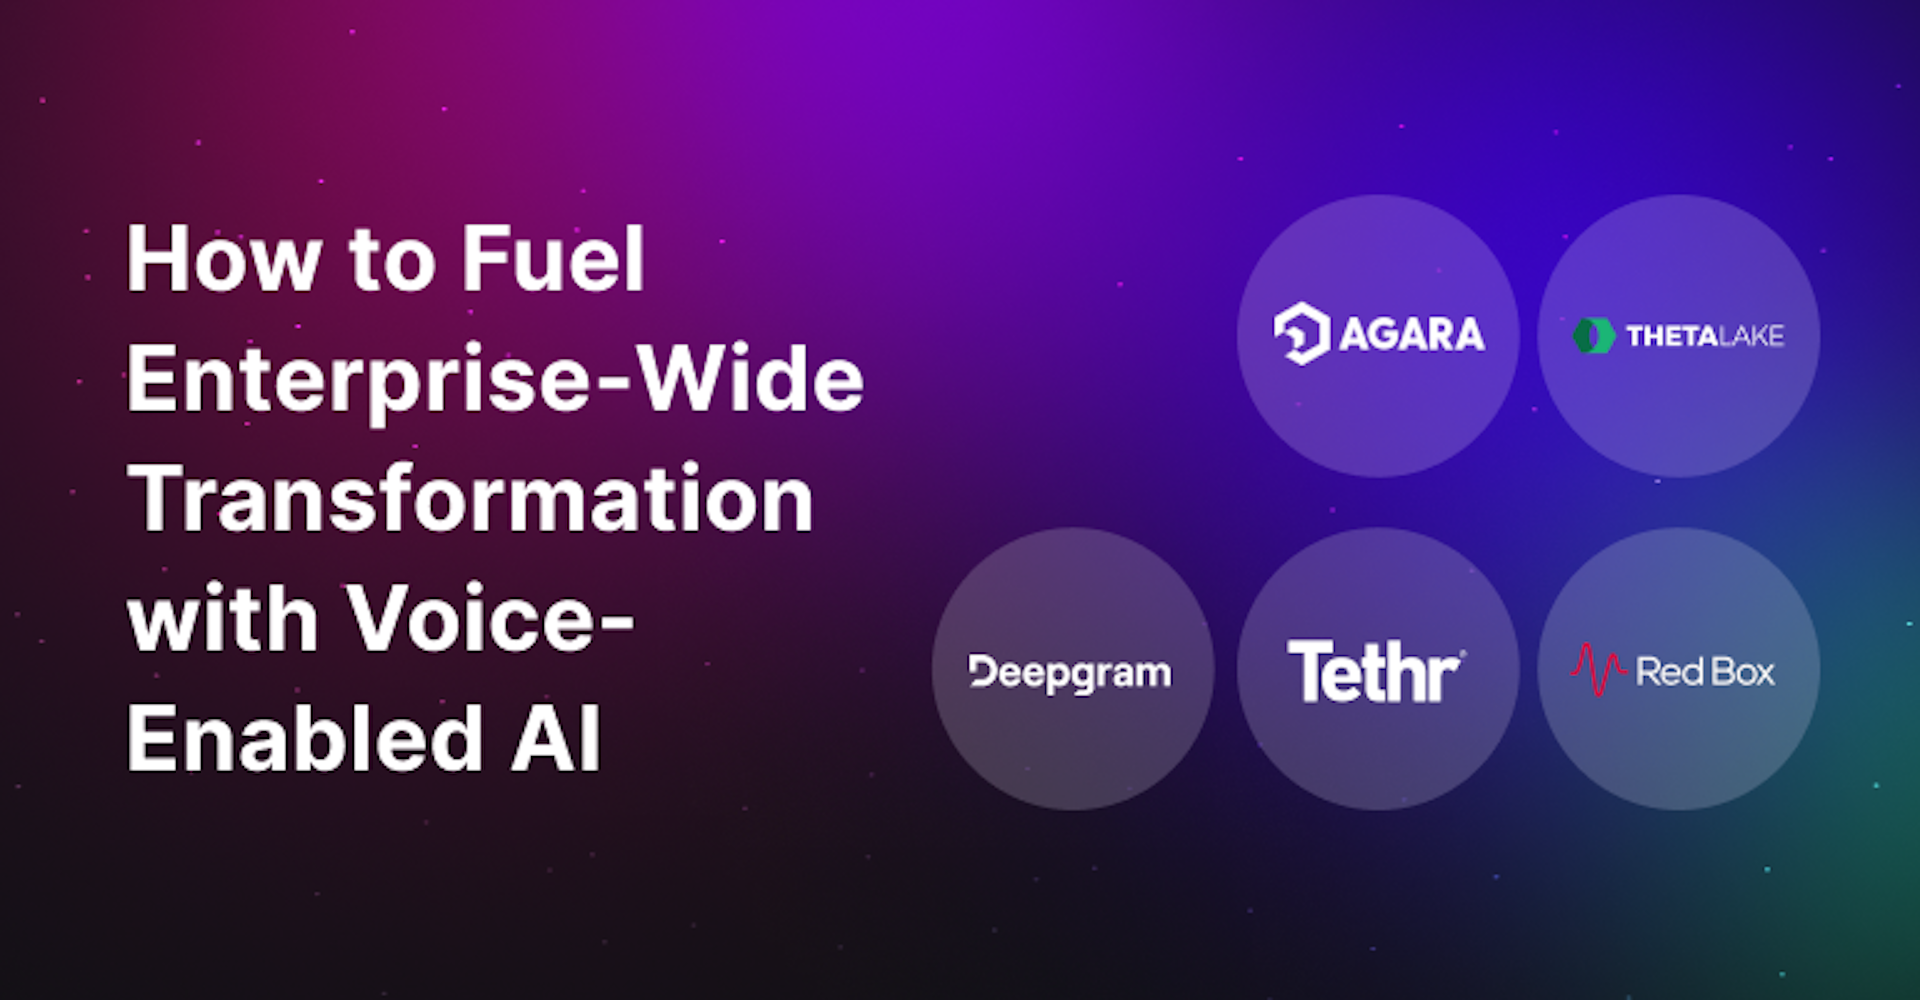 How to Fuel Enterprise-Wide Transformation with Voice-Enabled AI